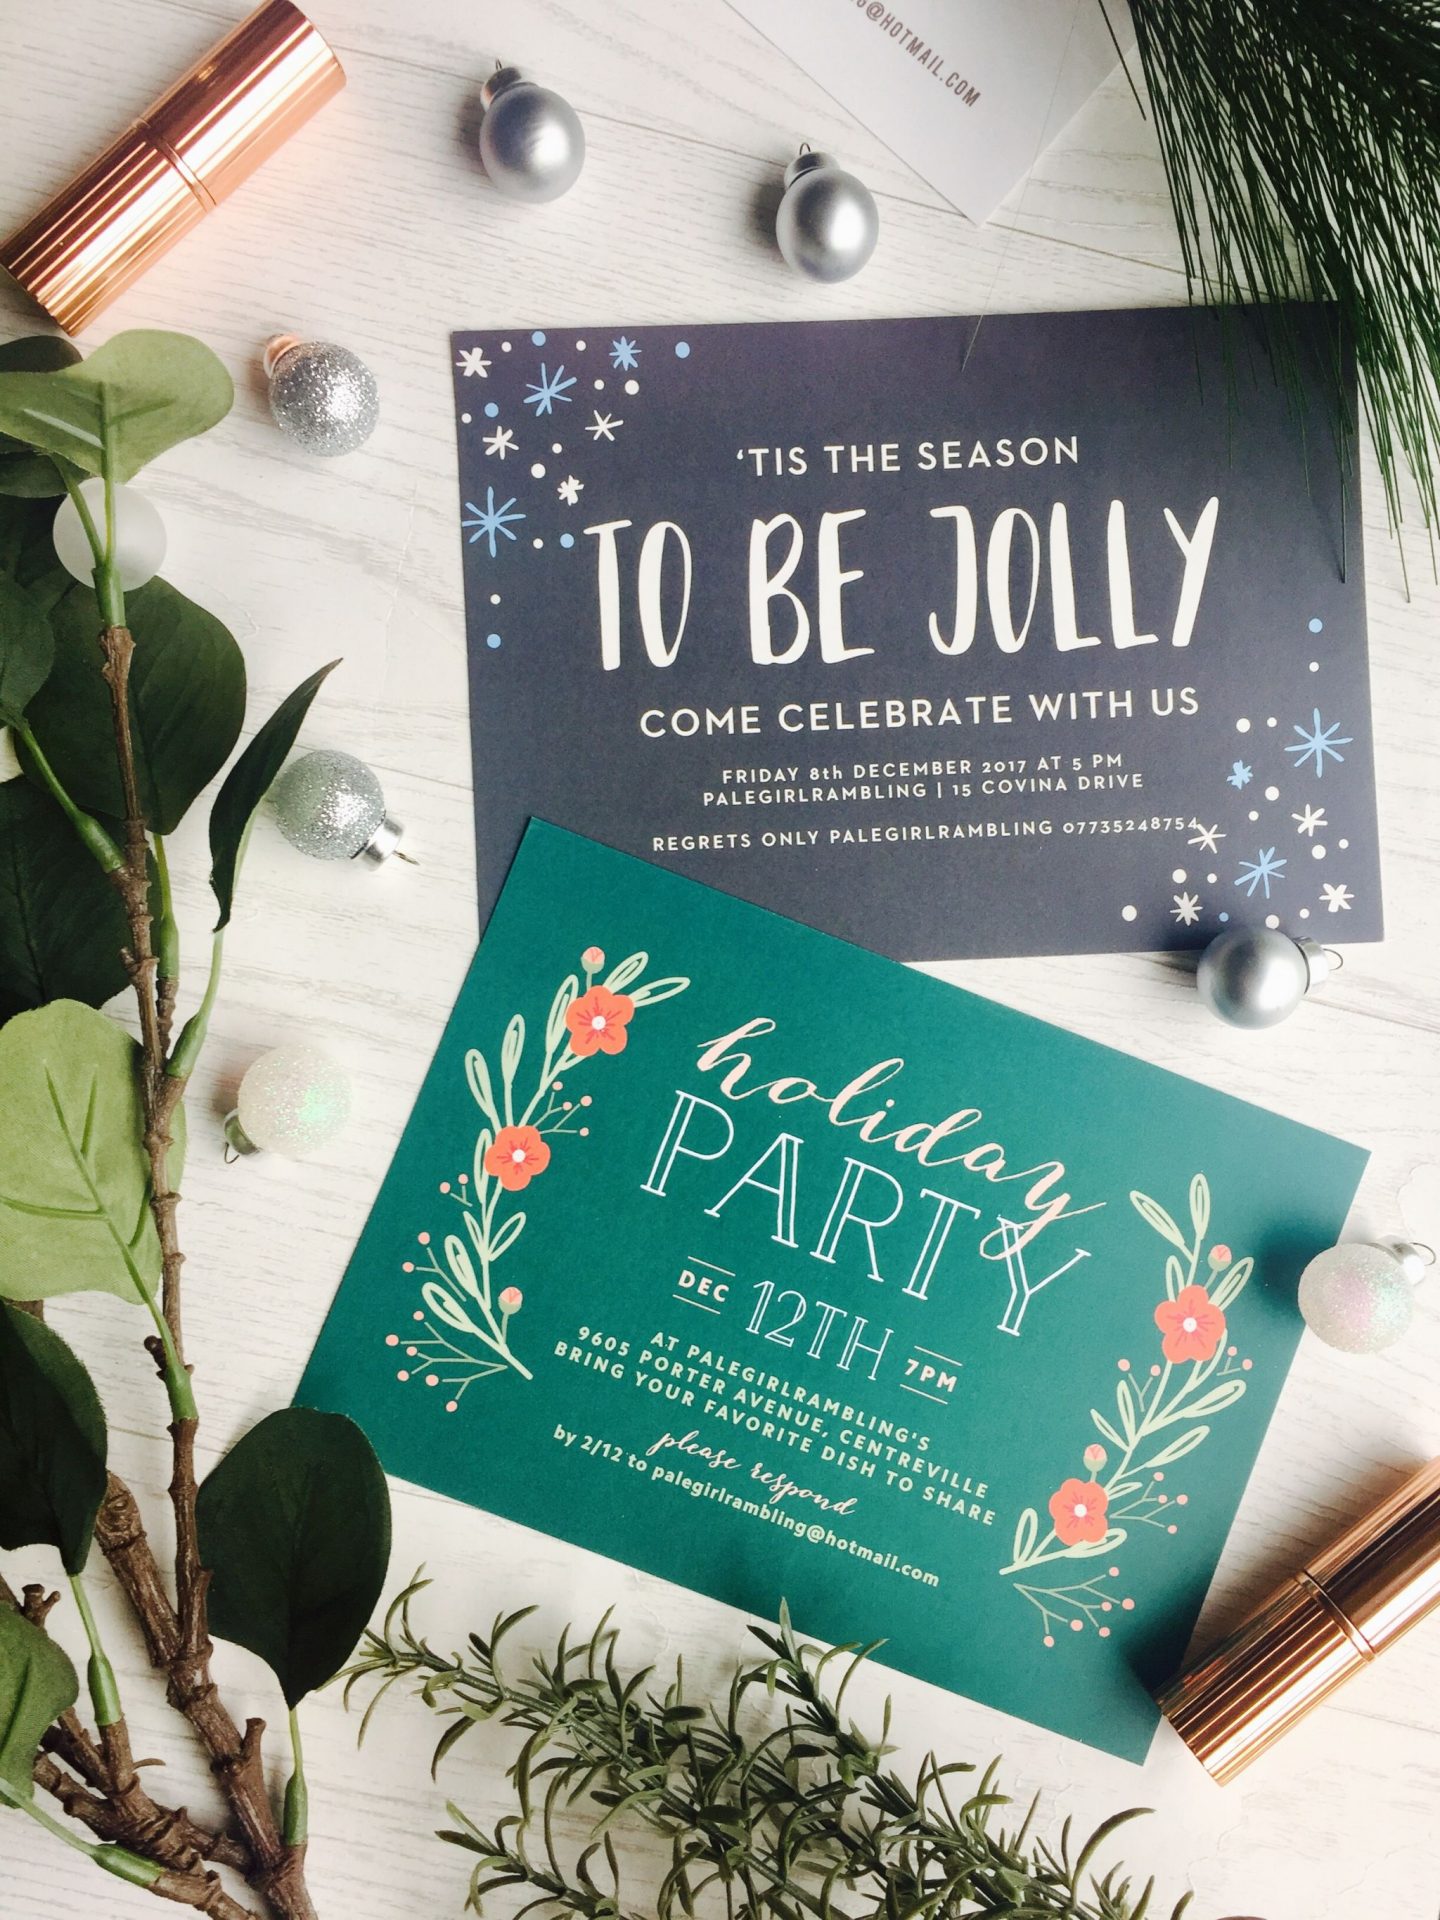 Getting festive with basic Invite and interior inspo